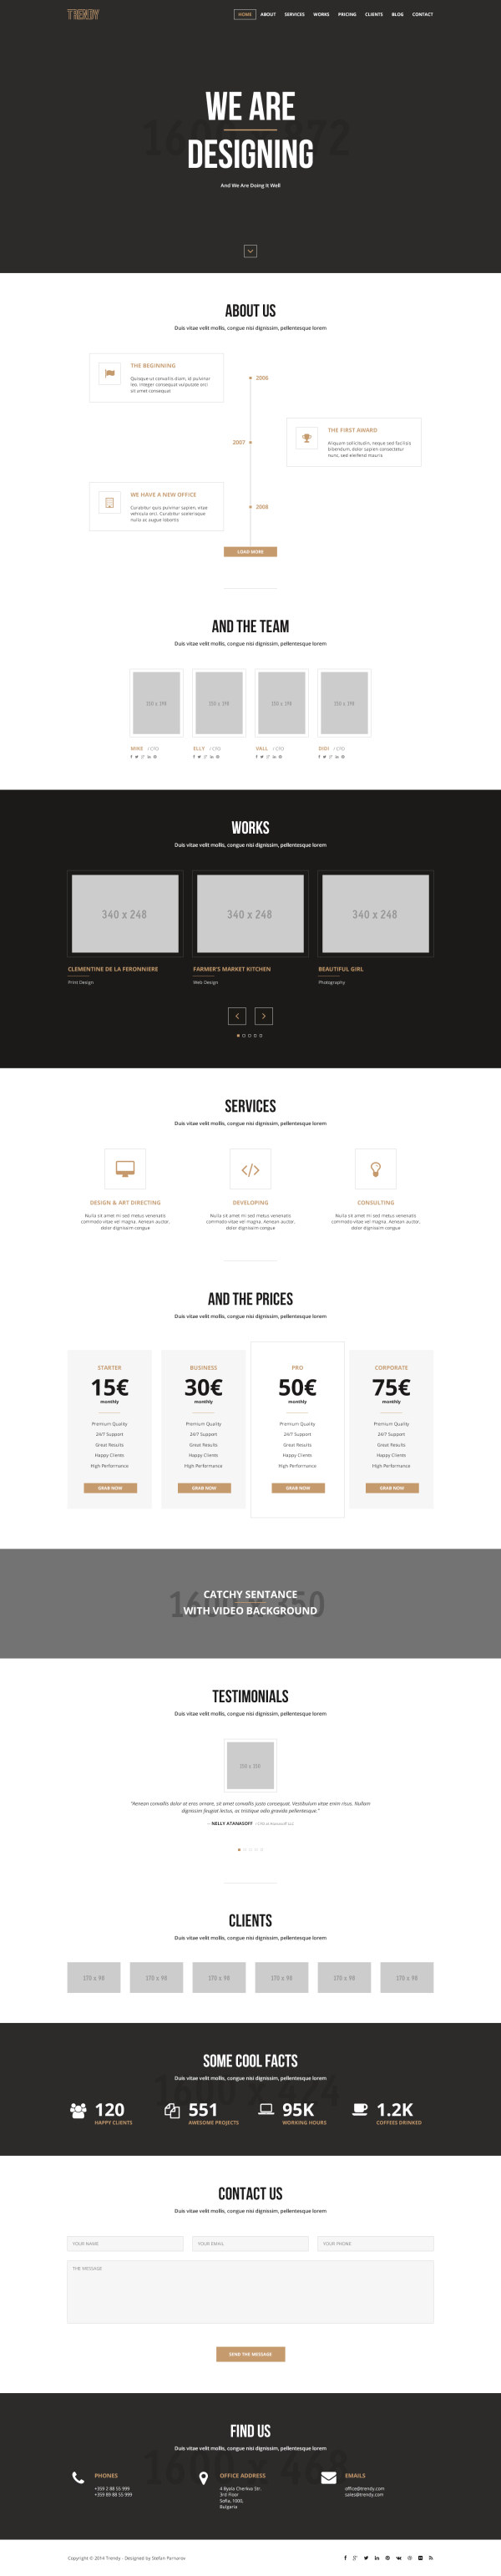 White and black business website template